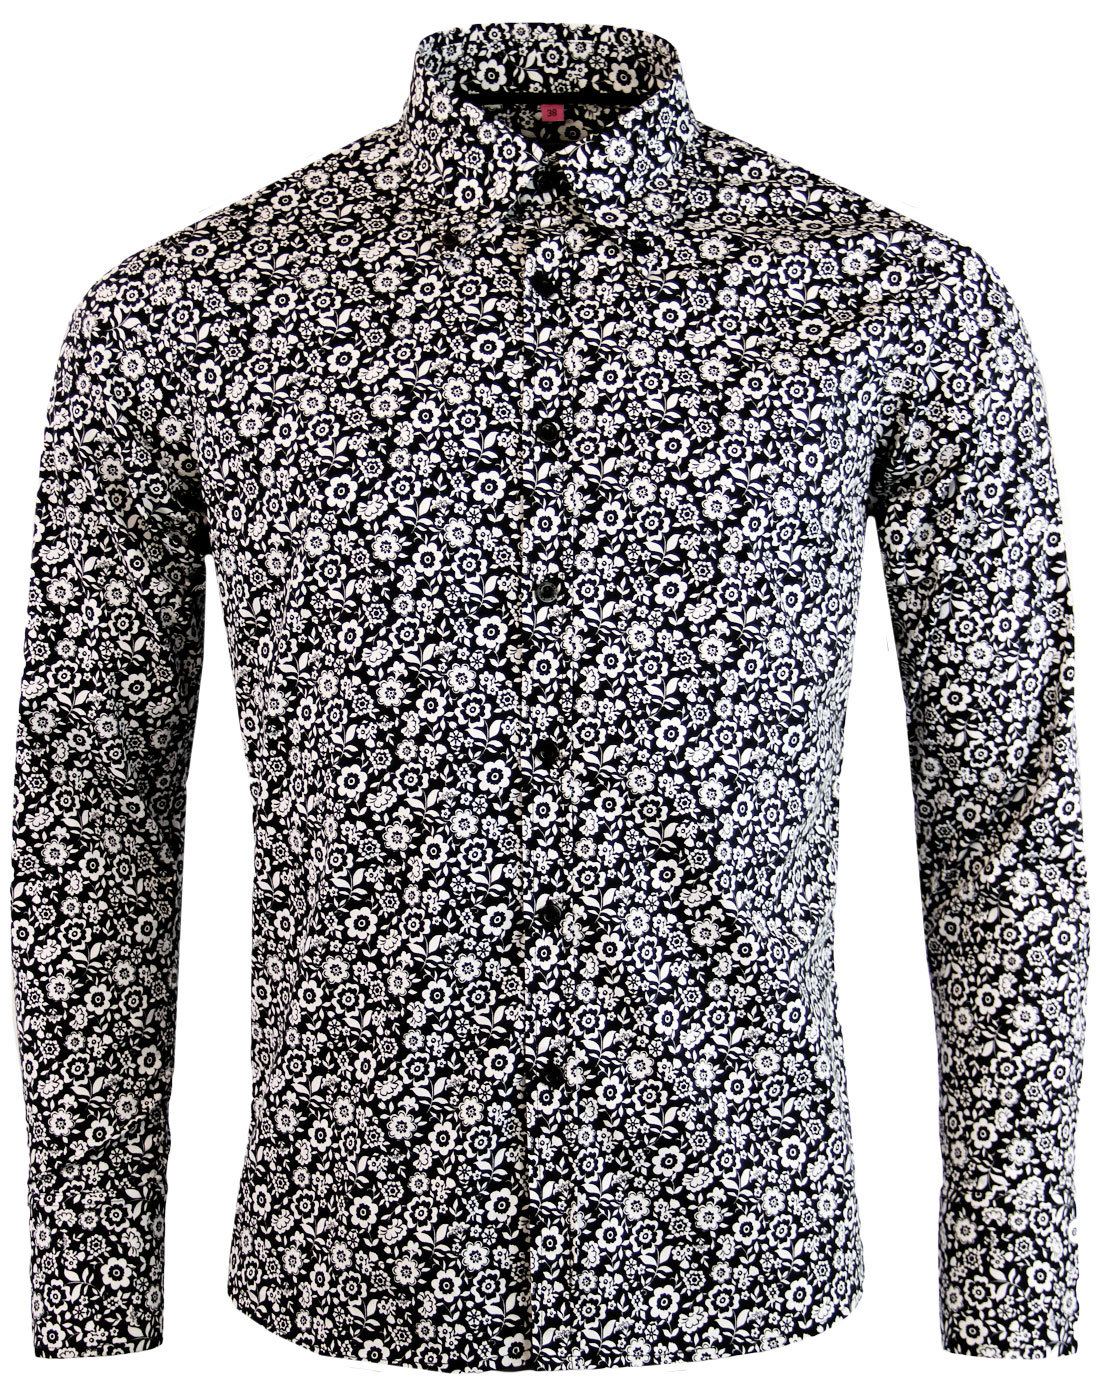 Trip Floral MADCAP ENGLAND Mod Psychedelic Shirt